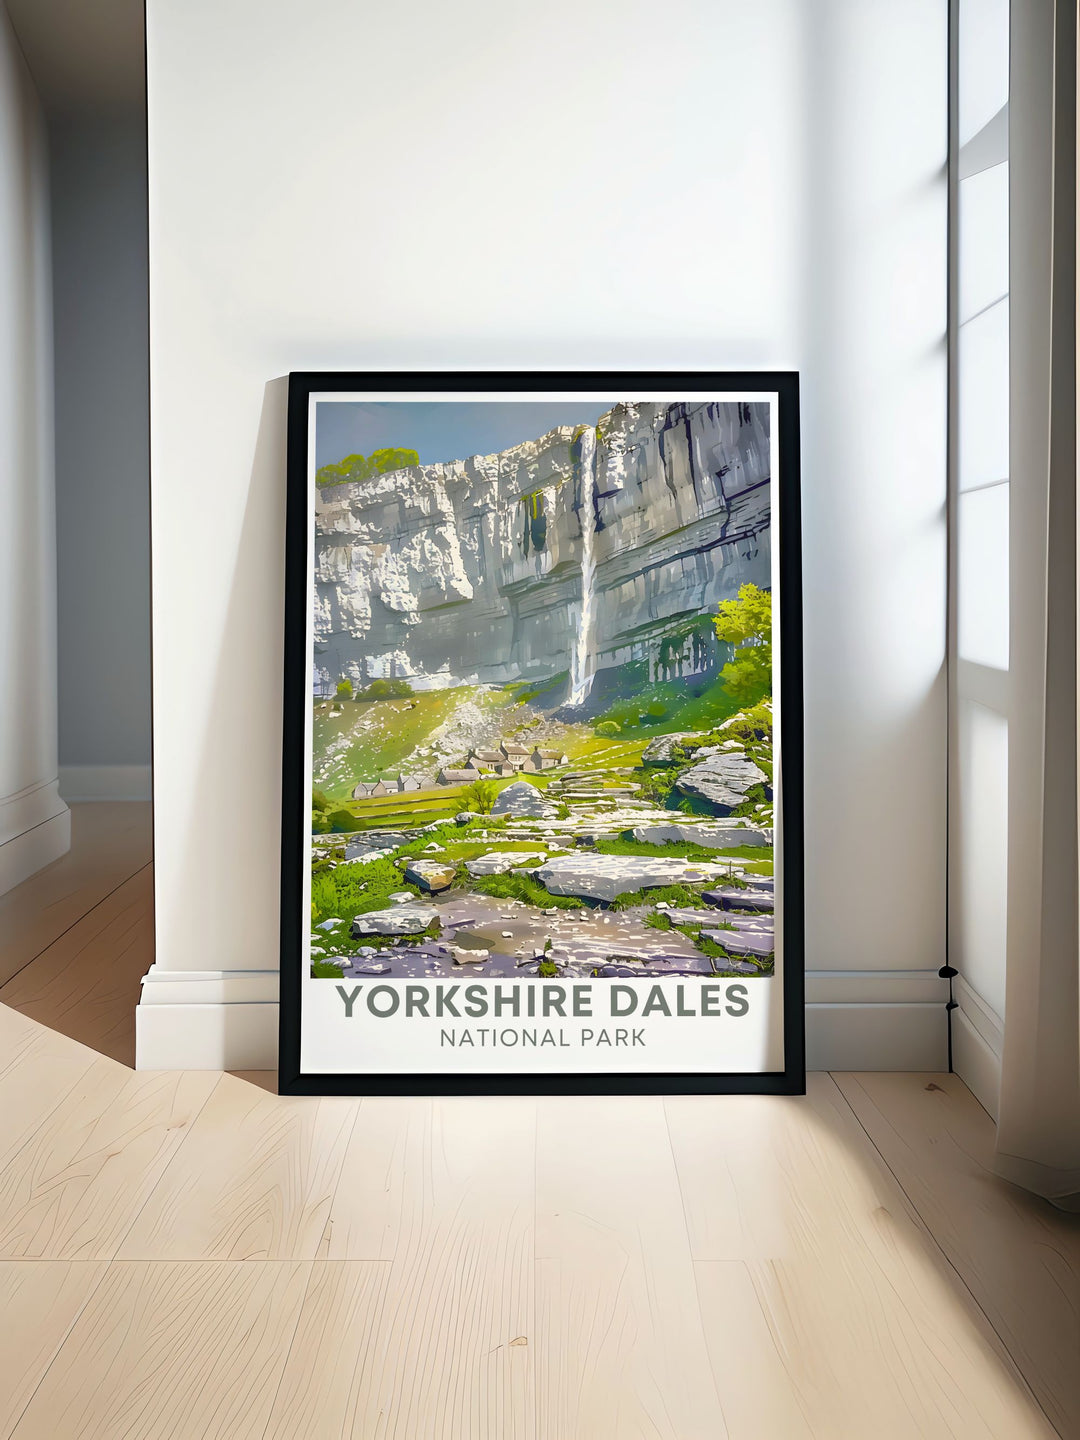 This Malhom Cov posterViaduct captures the serene beauty of the Yorkshire Dales with its rolling hills and tranquil landscapes making it a perfect addition to your home decor and a beautiful reminder of natures splendor.